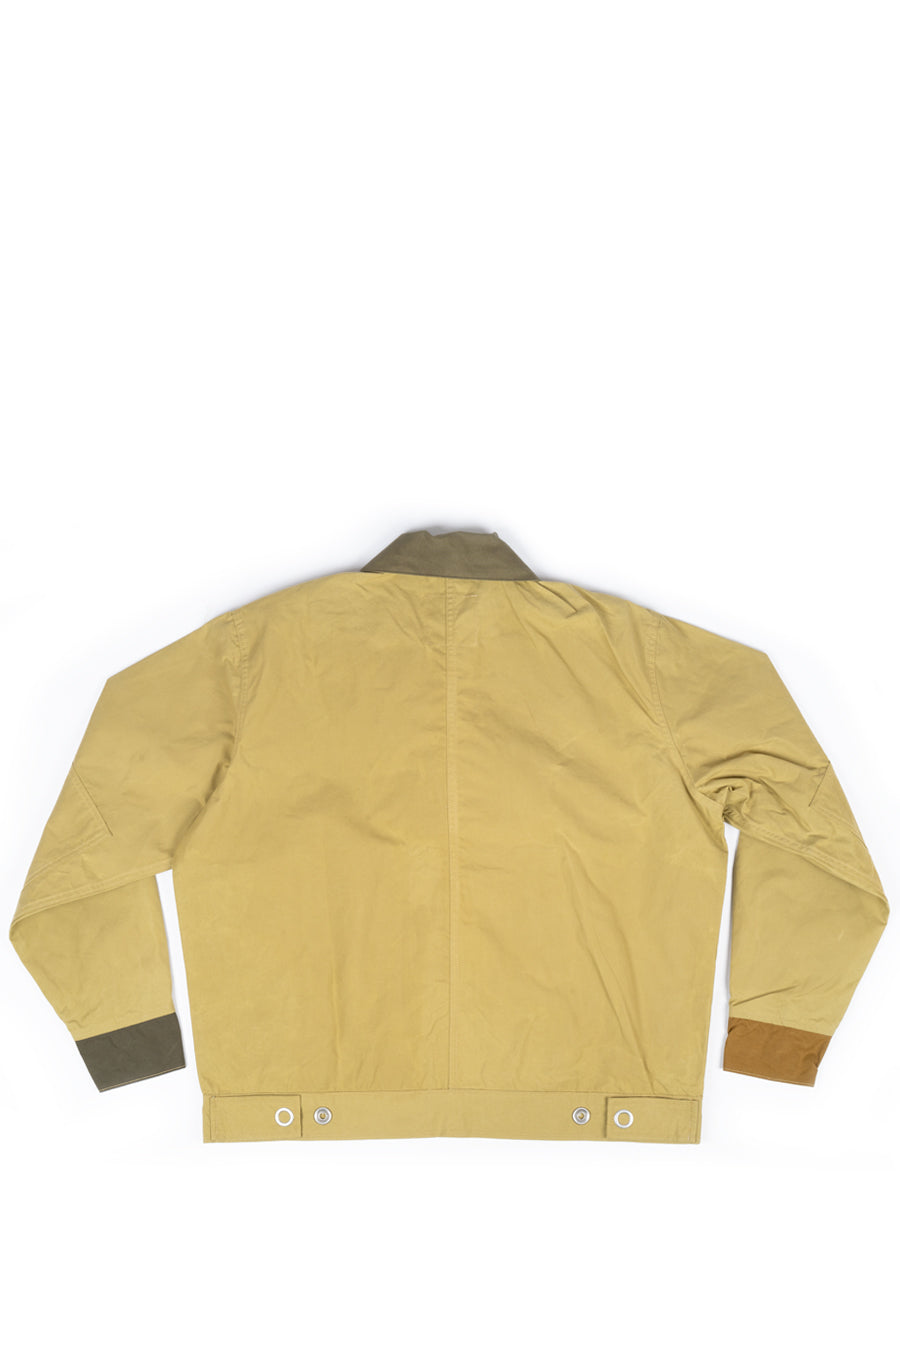 HOUSE OF PAA BIG RIG JACKET BROWN COMBO